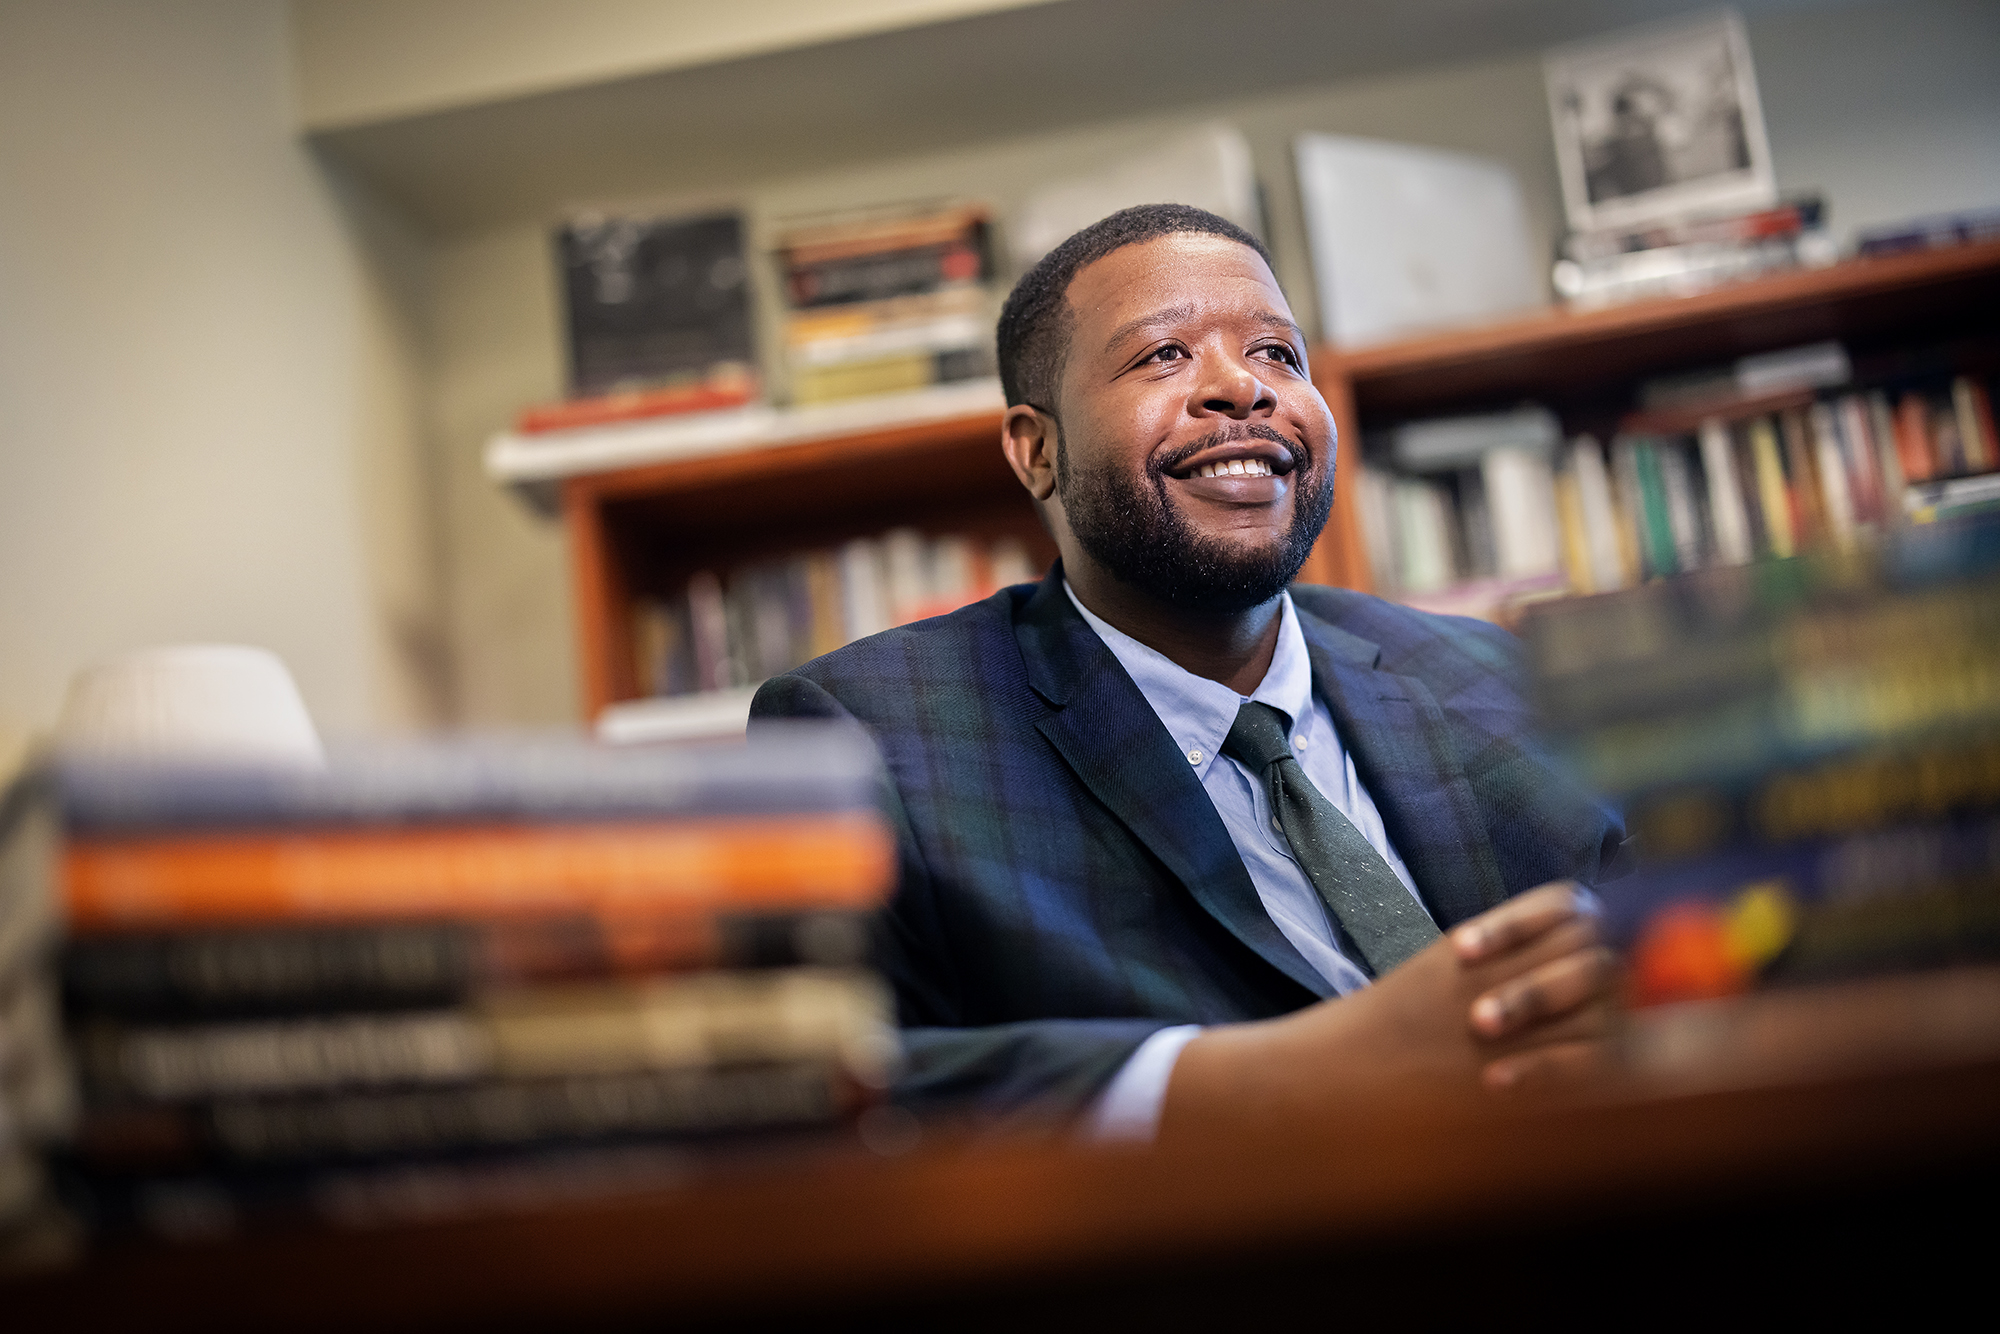 vaughn booker in his office surrounded by books